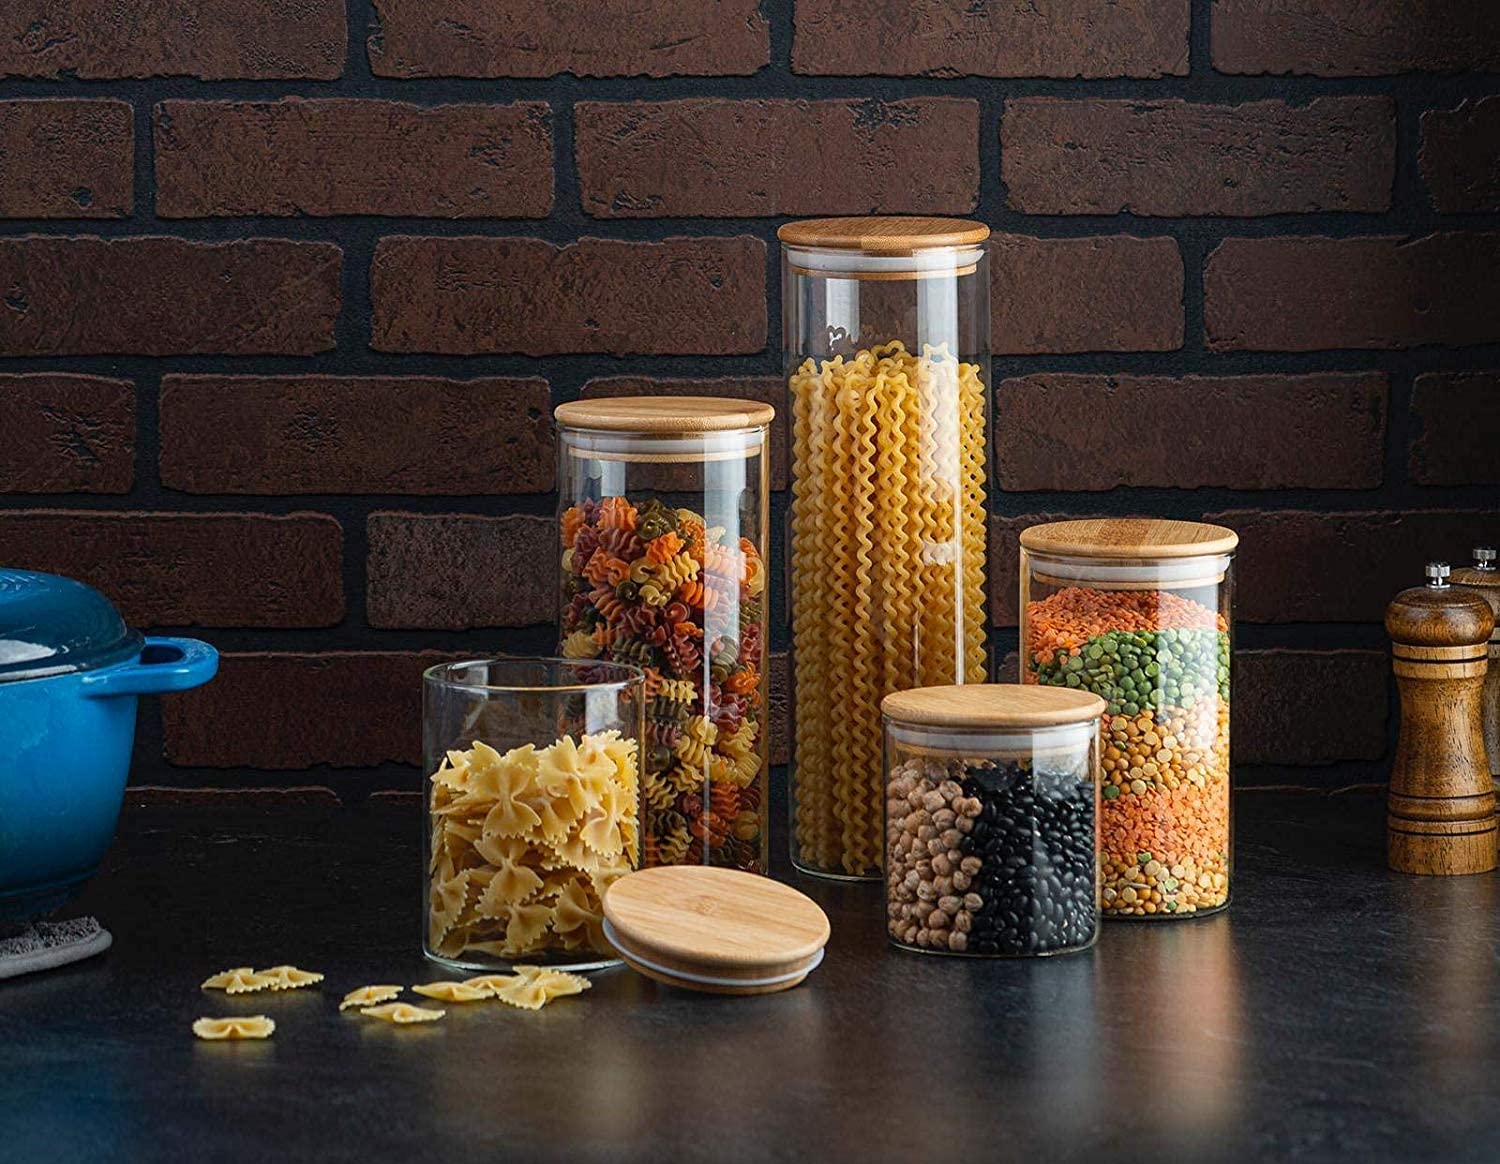 We Tried and Loved These 10 Dry Food Storage Containers